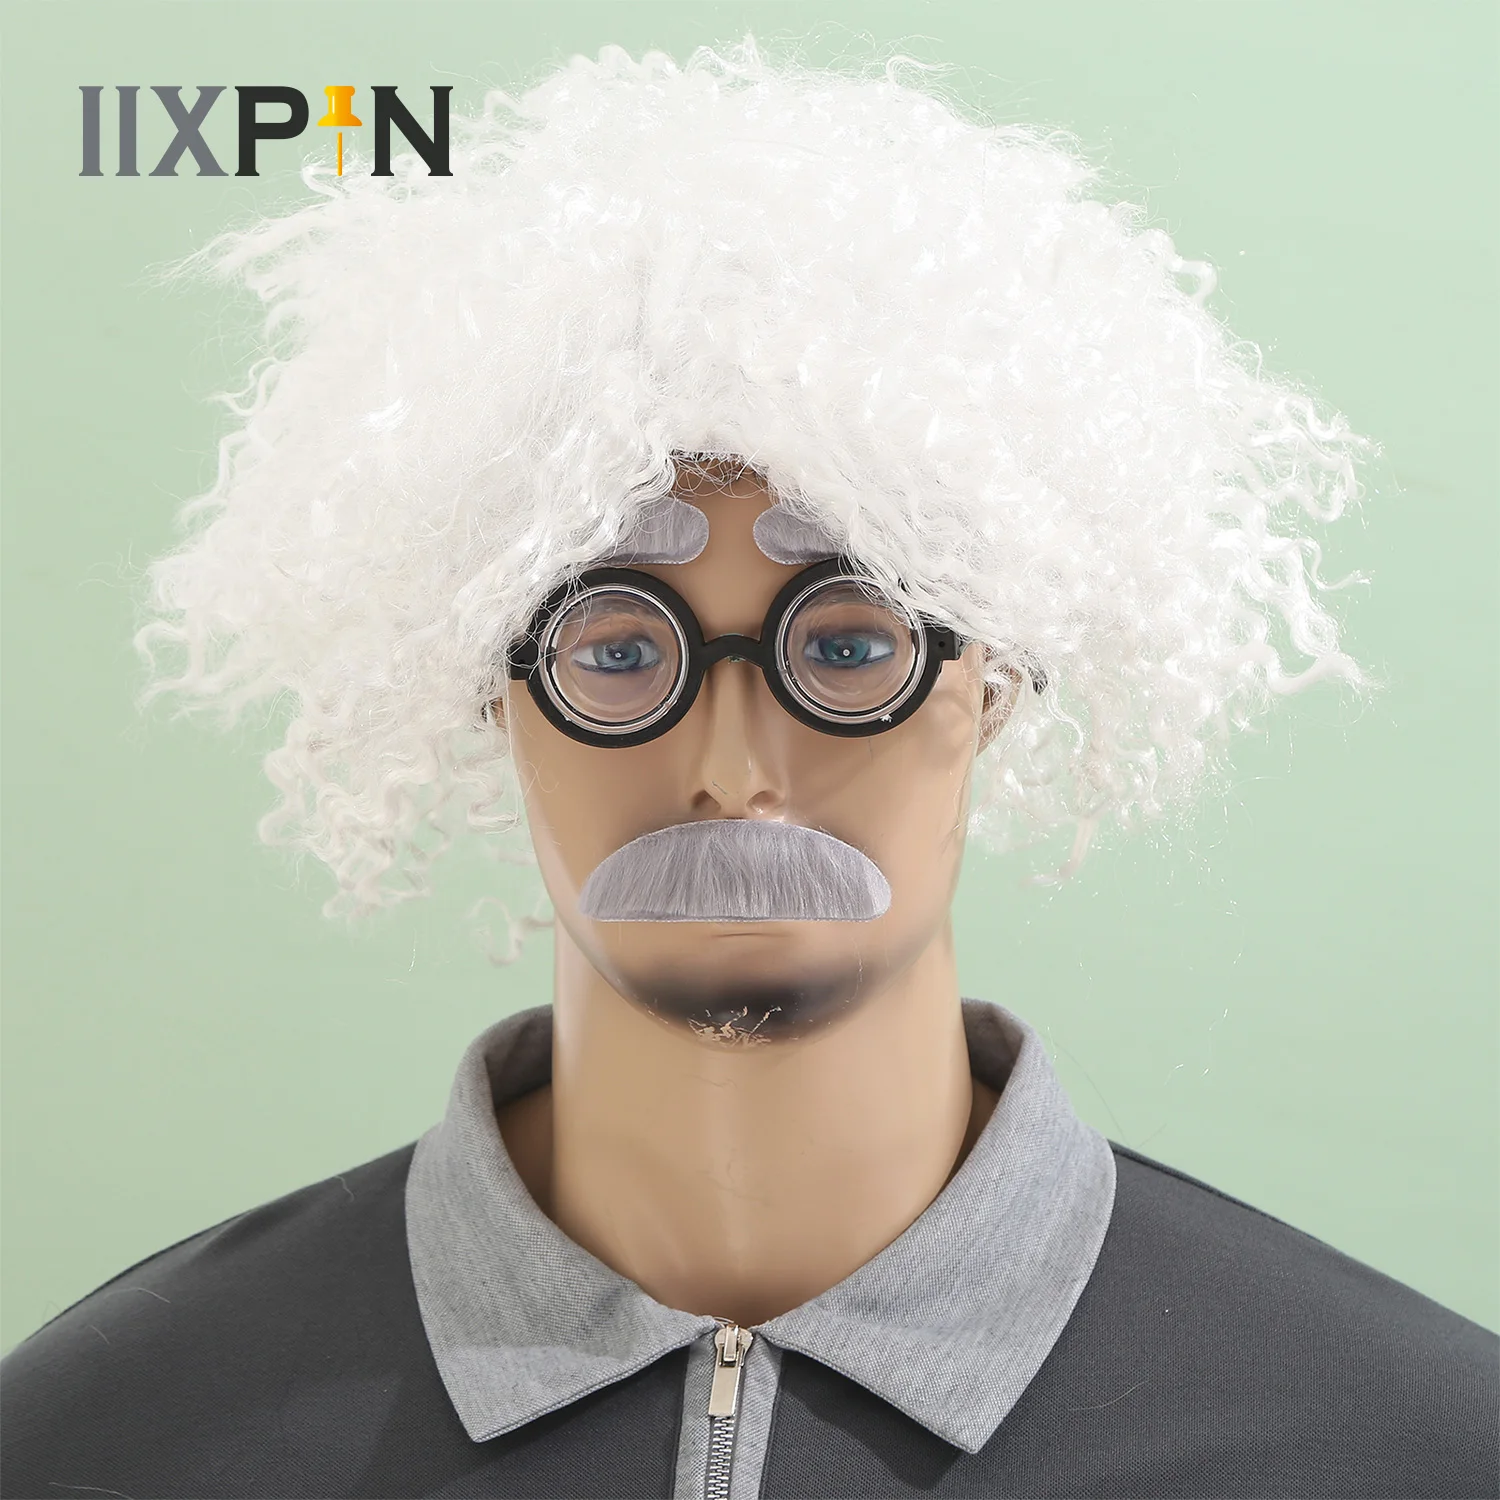 6Pcs Grandpa Wig Set Gray Hair Wig Glasses Faux Eyebrow Set Dress-up Cosplay Theatrical Show Performance Party Photography Prop